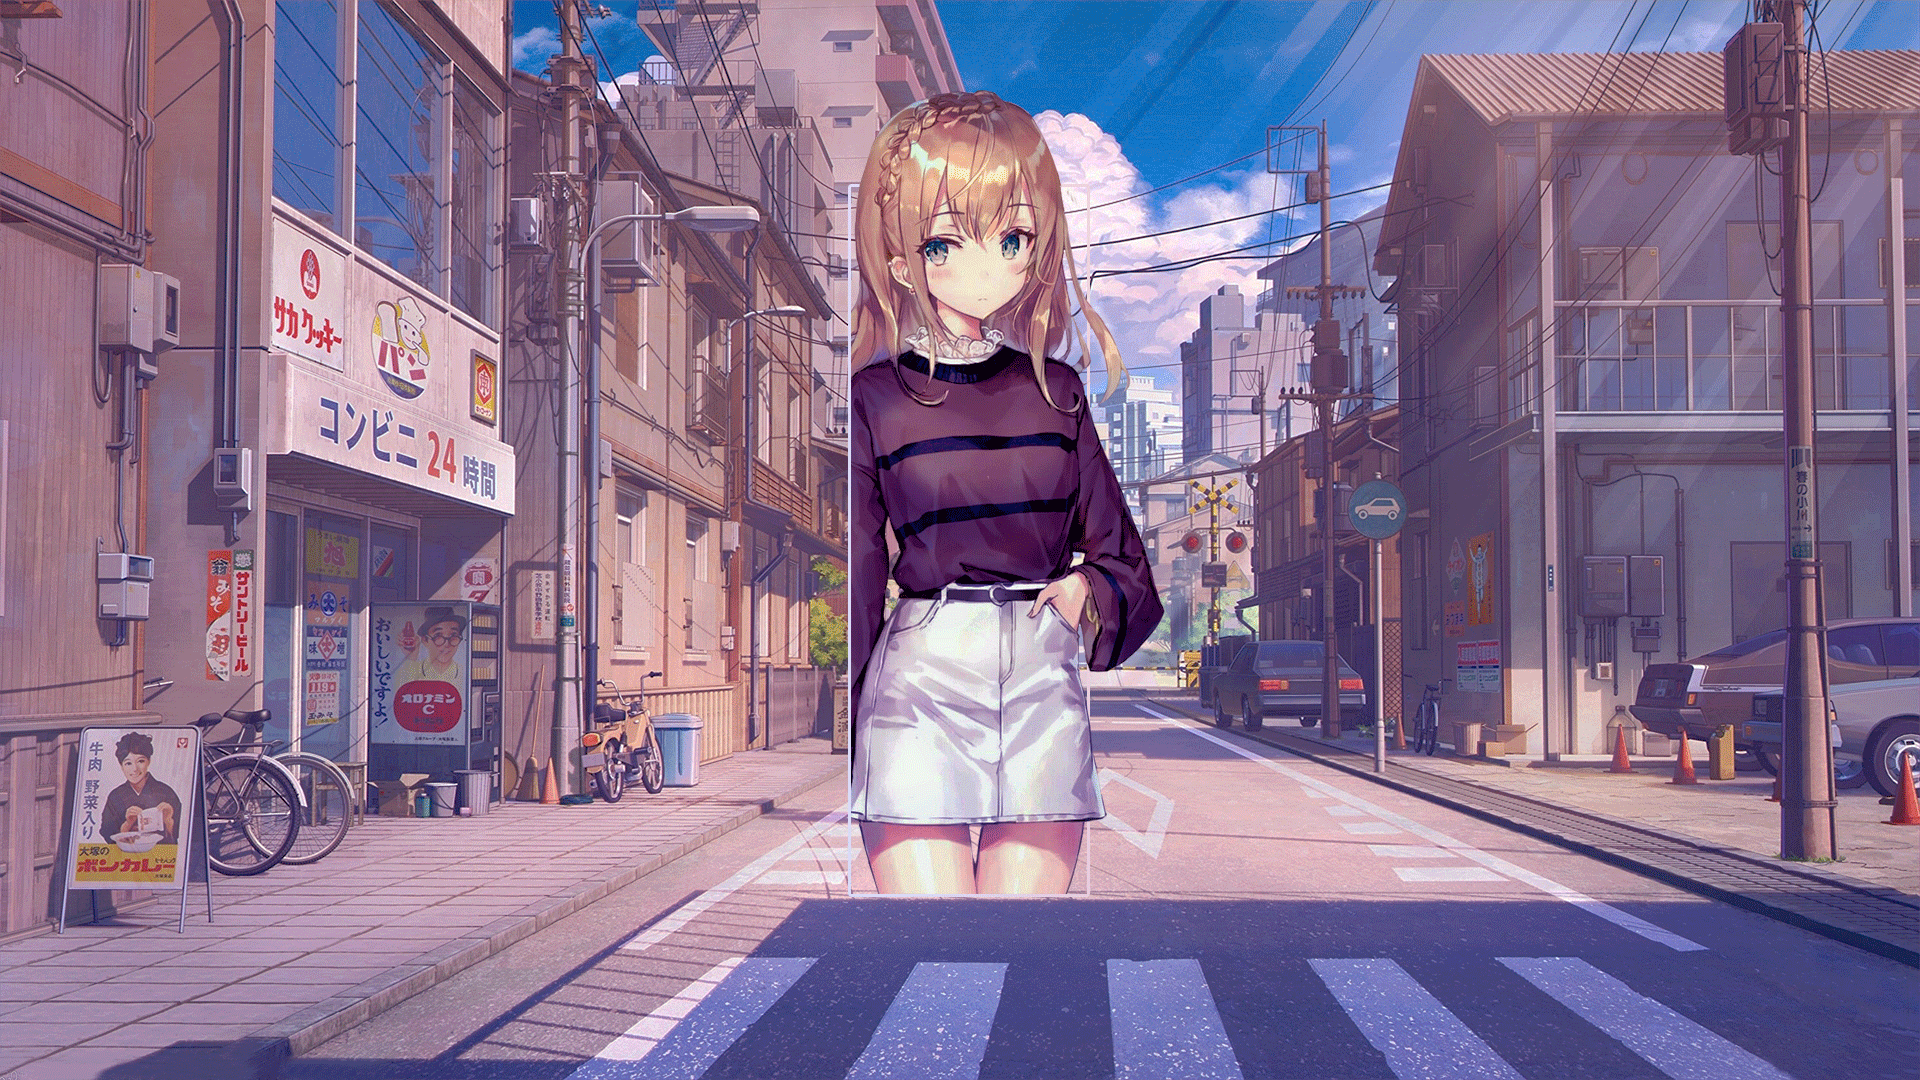 Anime Anime Girls Street City Morning Photoshop Digital Art Picture In Picture Abstract Landscape 1920x1080